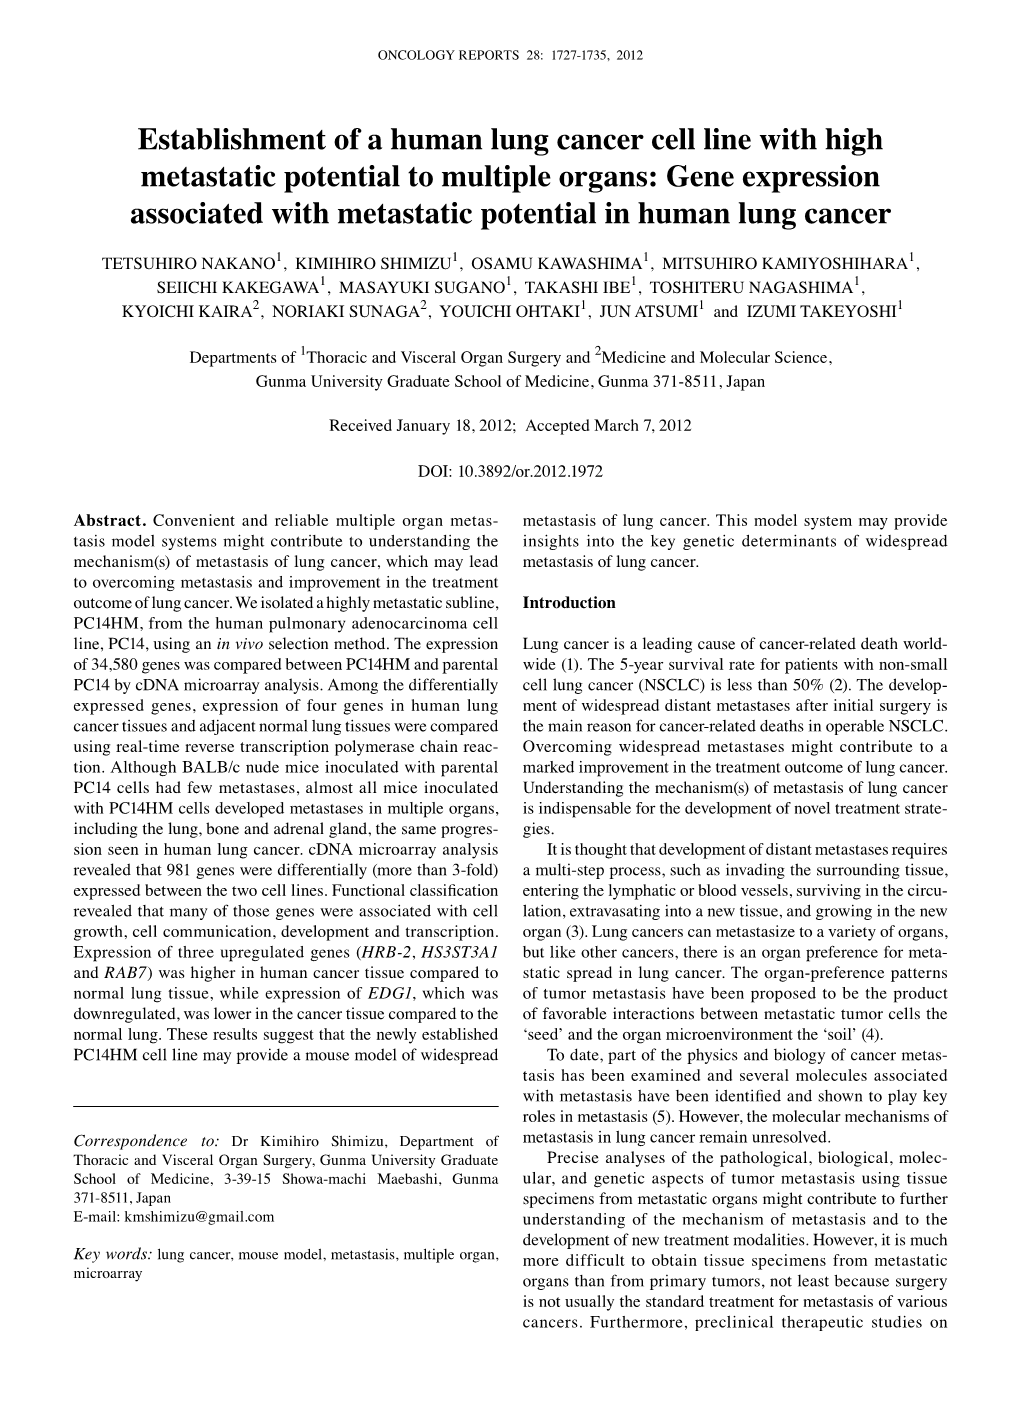 Establishment of a Human Lung Cancer Cell Line with High Metastatic